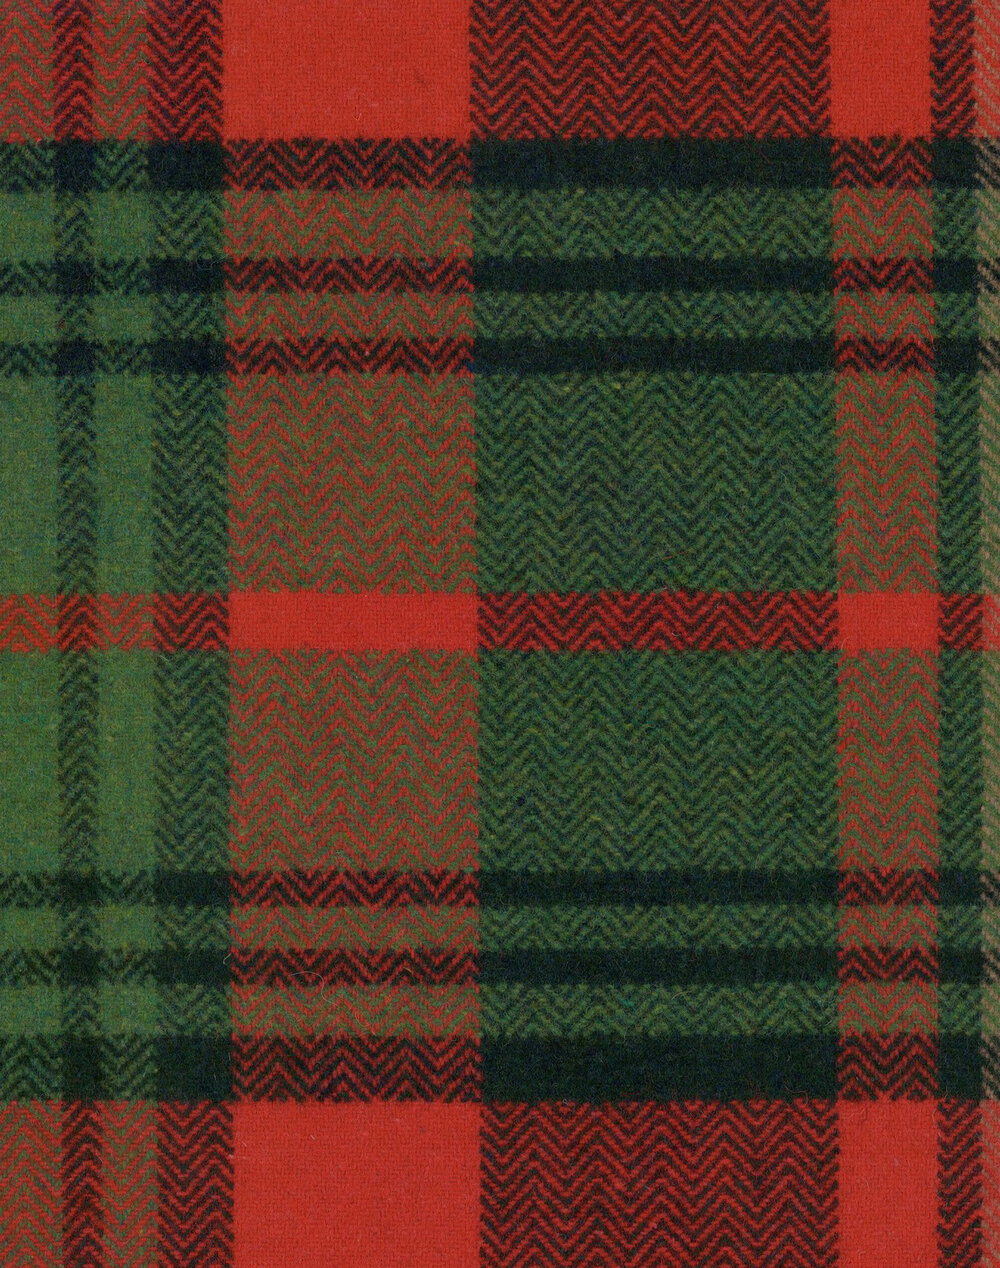 Tyrolean Plaid Fabric - Black/ Red/ Green - by Mind the Gap